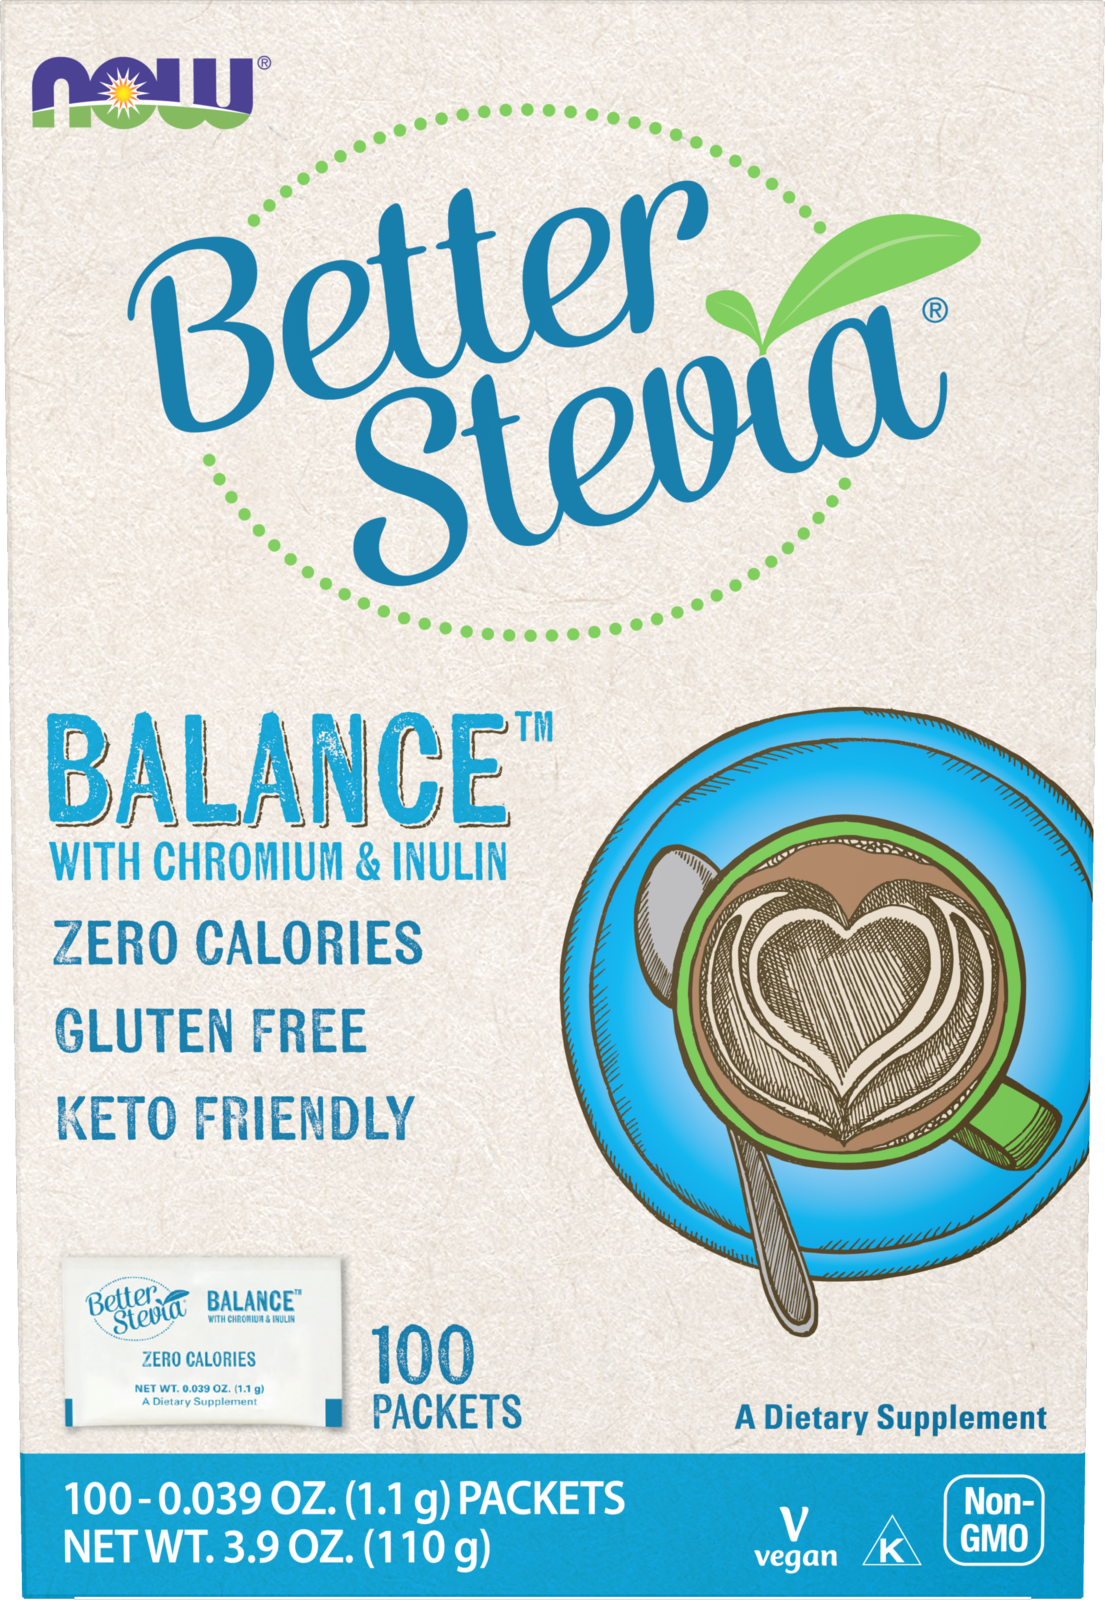 BetterStevia® Balance with Chromium & Inulin - 100 Packets Box Front